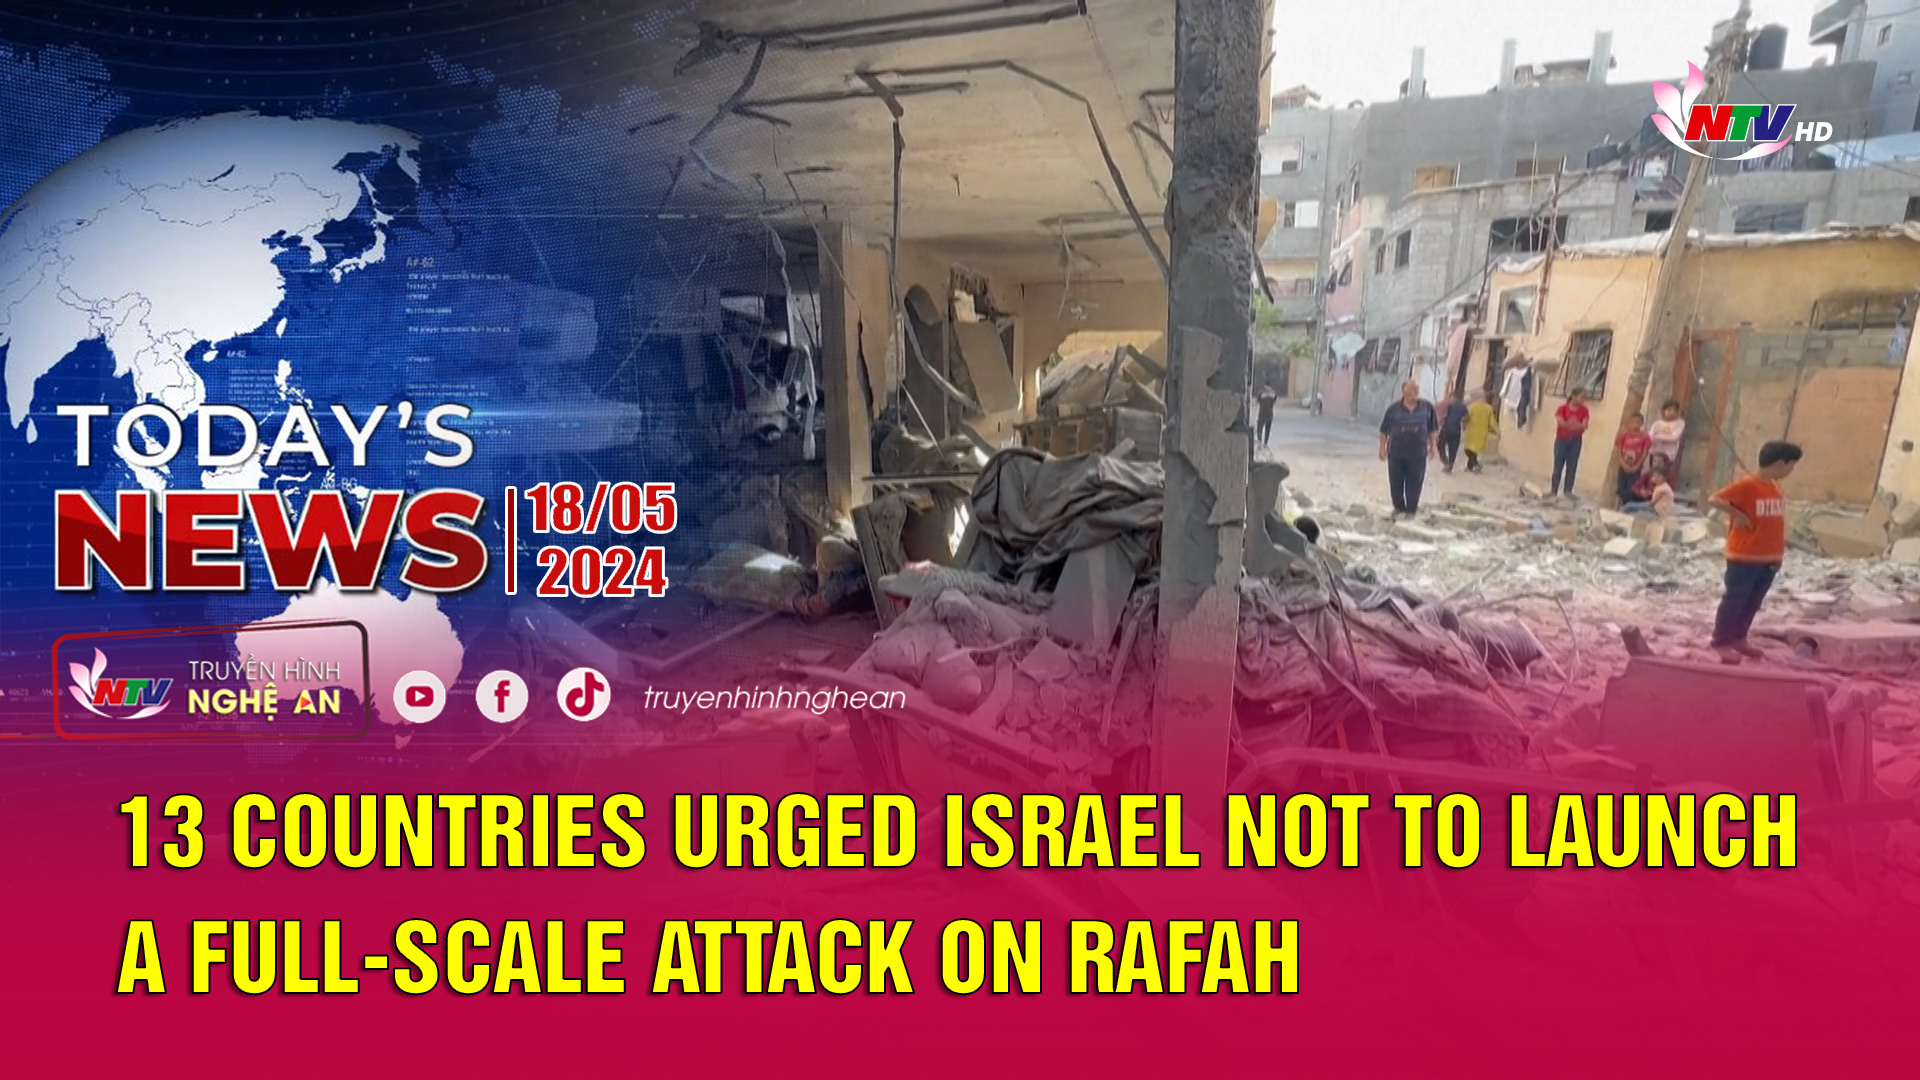 Today's News 18/05/2024: 13 countries urged Israel not to launch a full-scale attack on Rafah